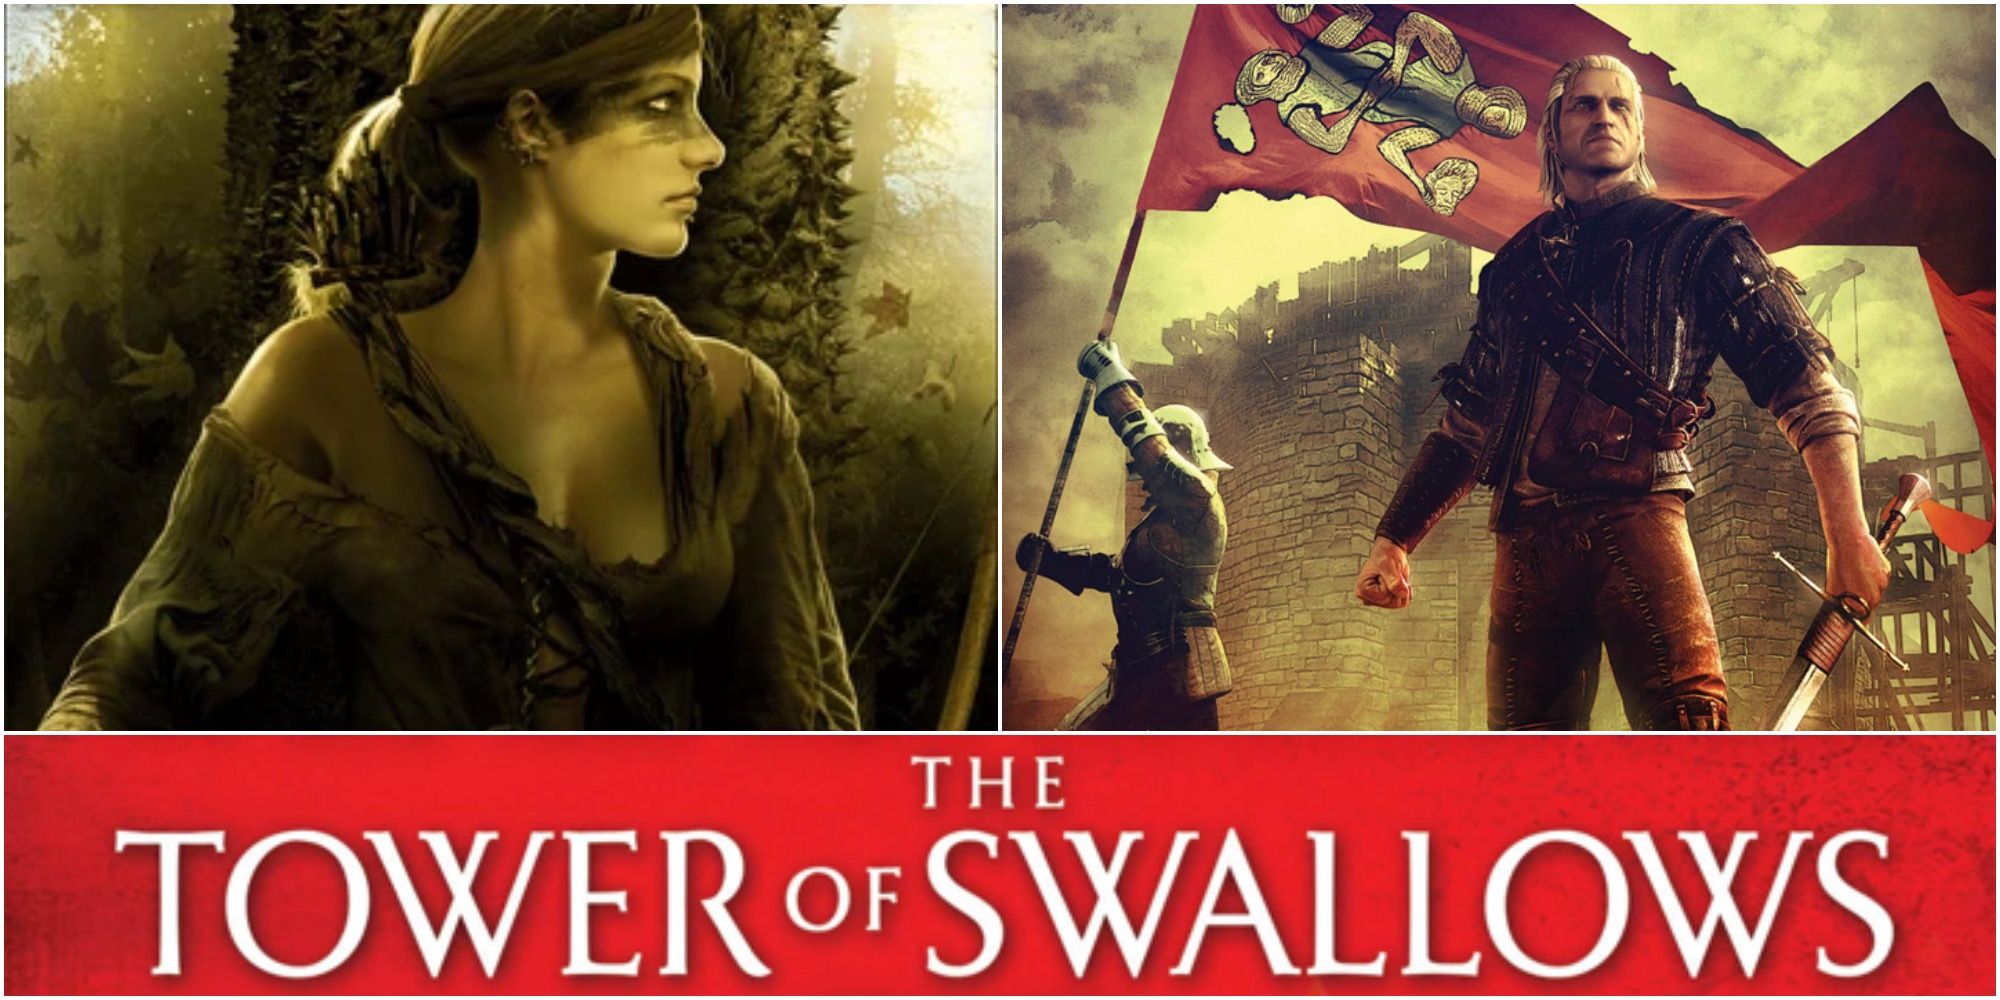 Collage Of The Witcher Novels The Tower of Swallows by Andrzej Sapkowski Maria Milva And Geralt Of Rivia